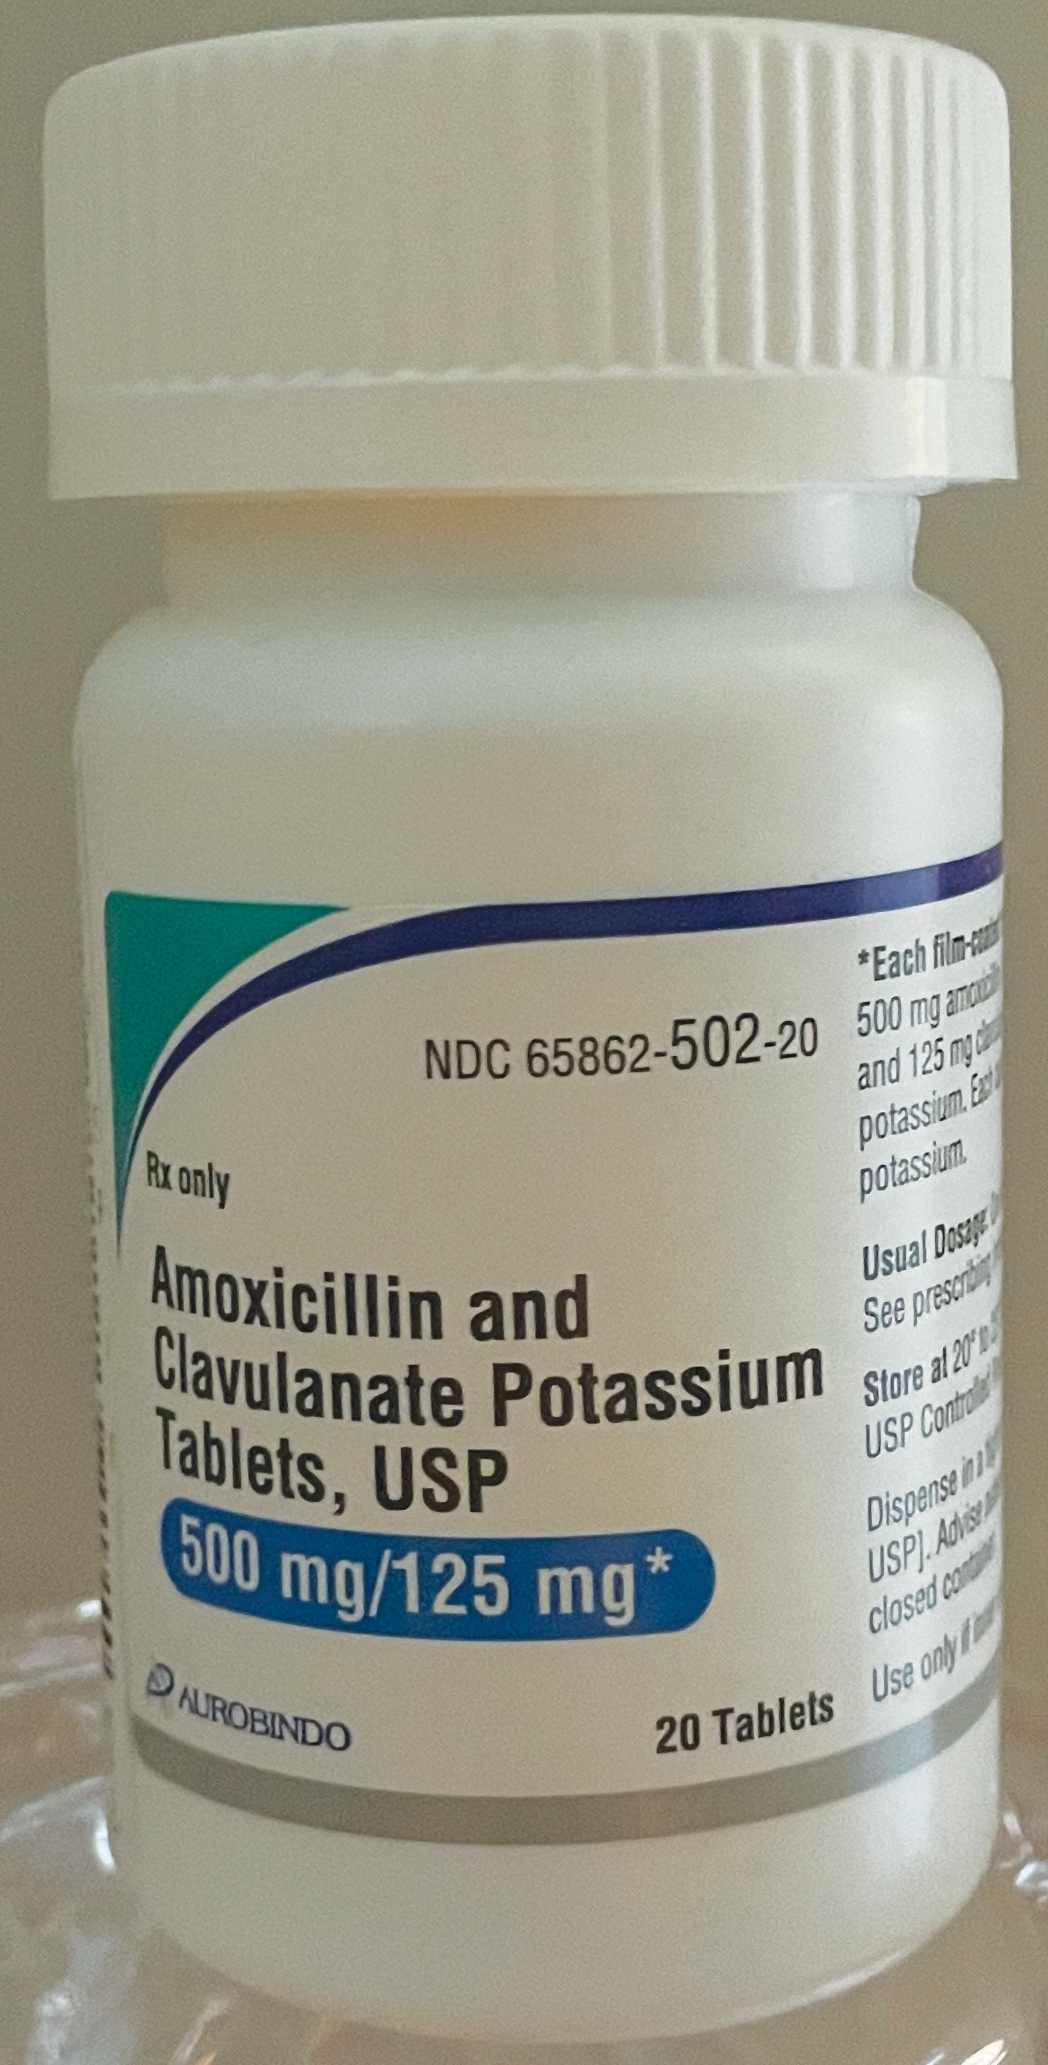 Amoxicillin and clavulanate potassium tablets are commonly prescribed to children and typically dosed based on weight.